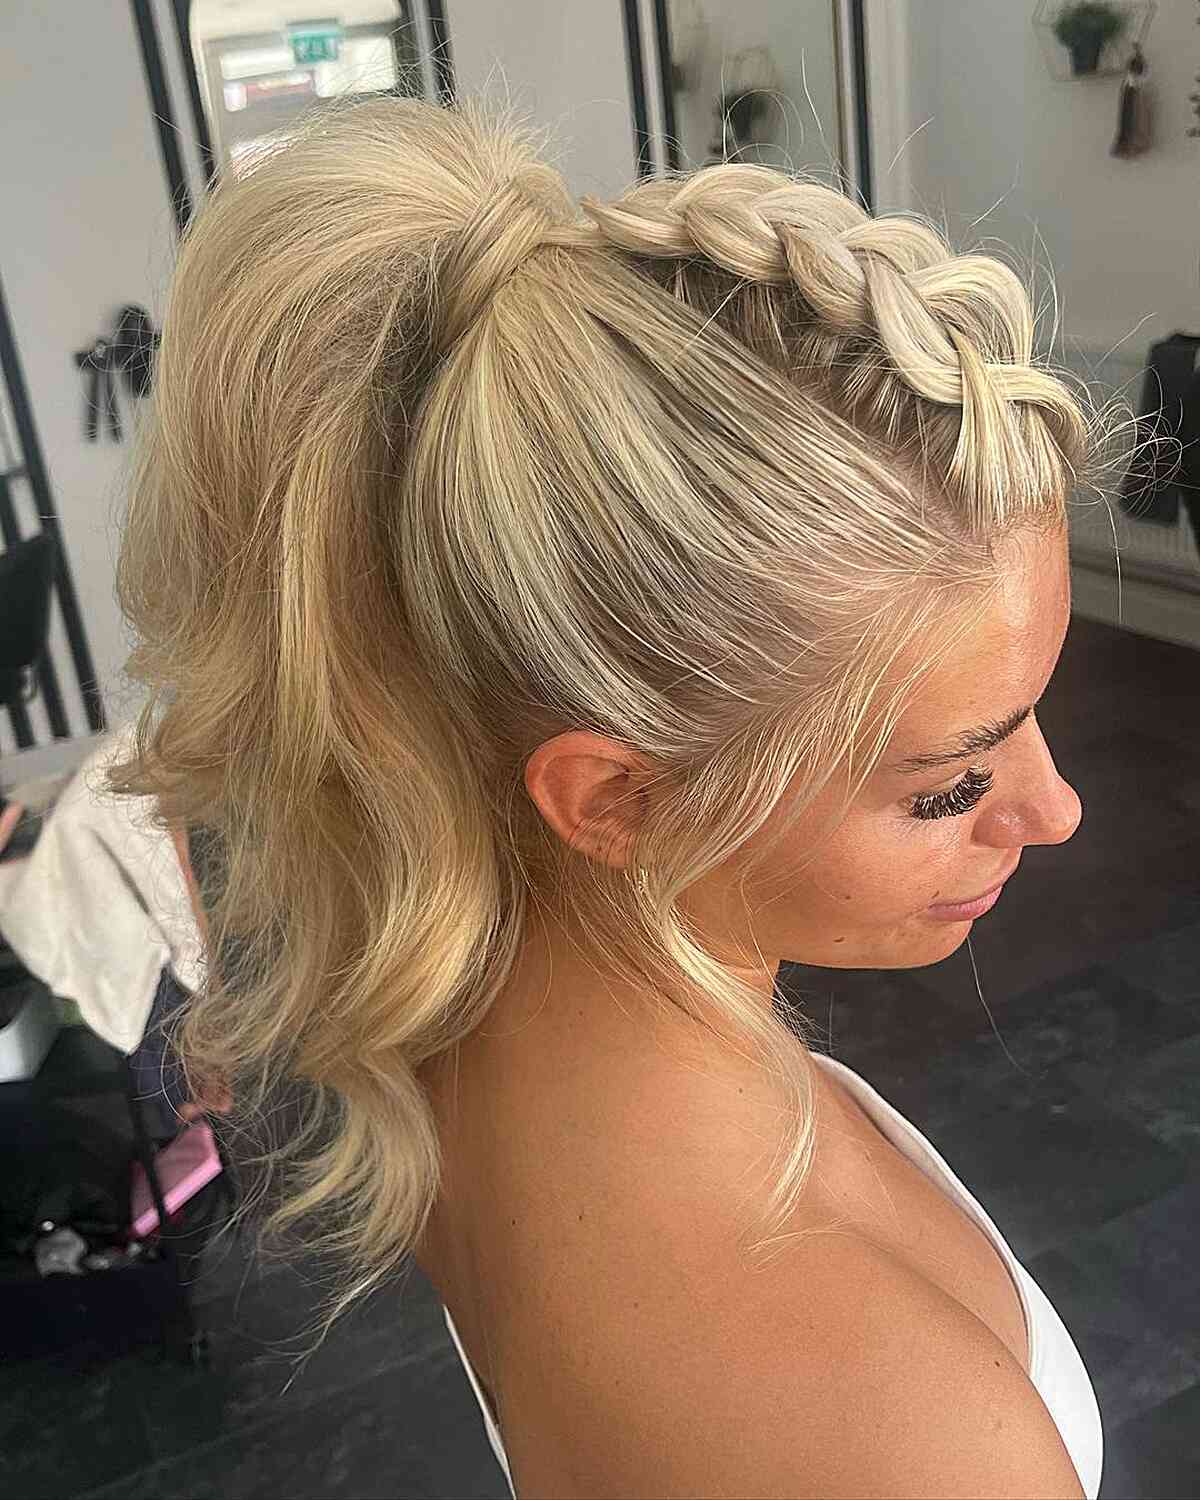 Voluminous Blonde Braided Pony for Rave Parties